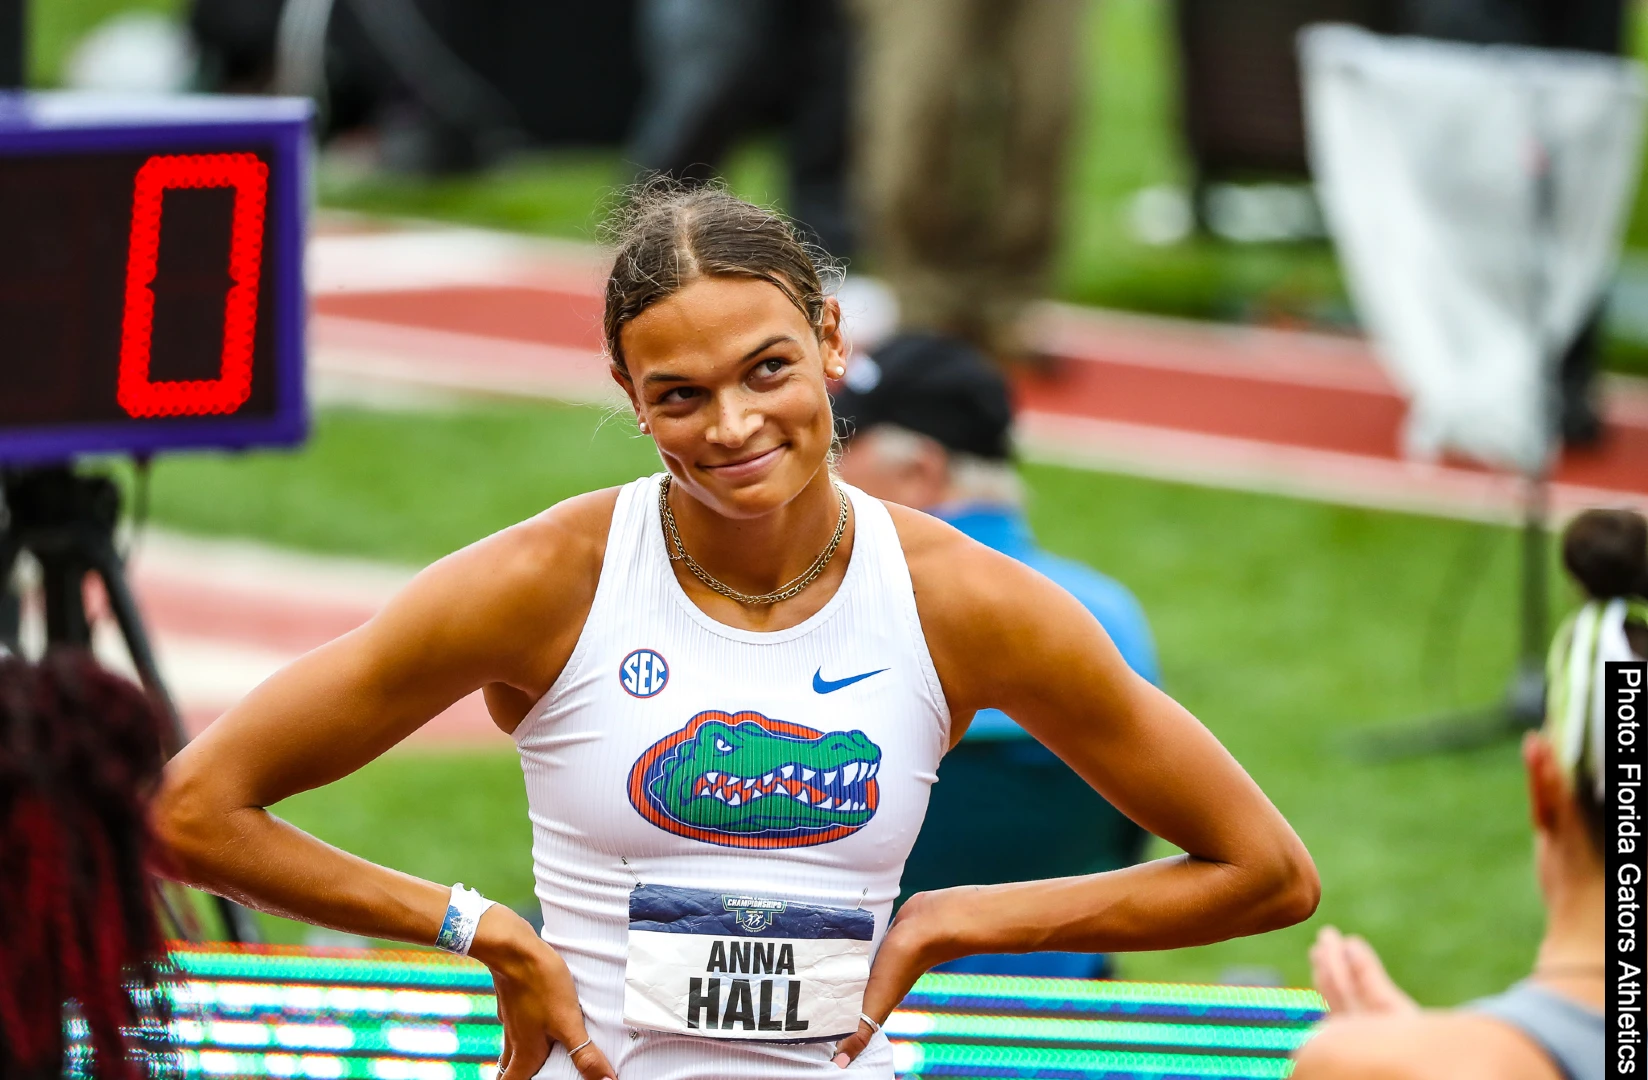 Anna Hall opens season with 60m hurdles win at Clemson Invite